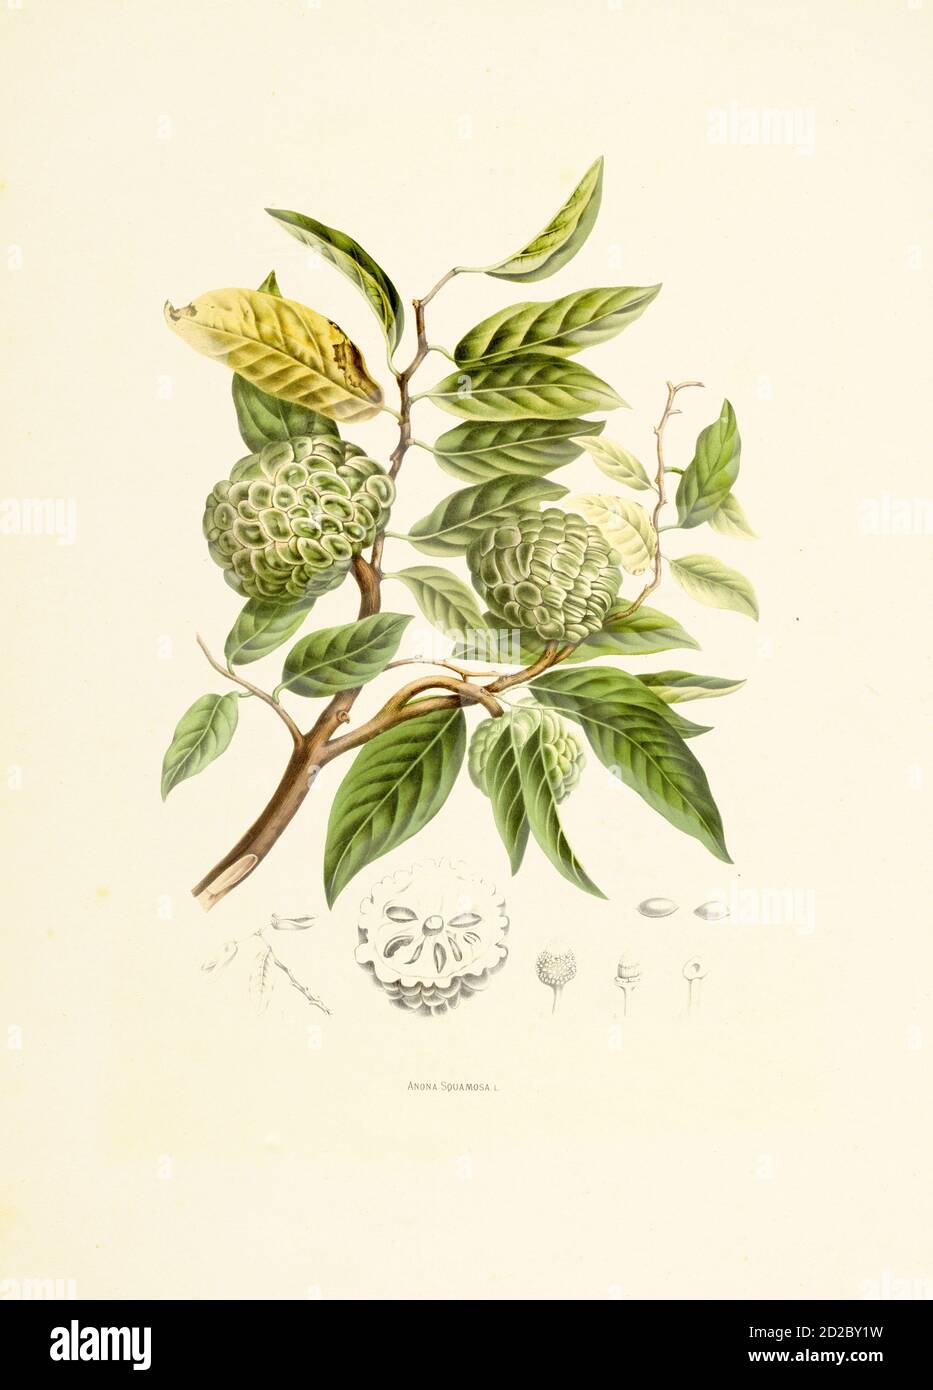 Antique 19th-century engraving of an annona squamosa, also known as sugar apple. Illustration by Berthe Hoola van Nooten from the book Fleurs, Fruits Stock Photo